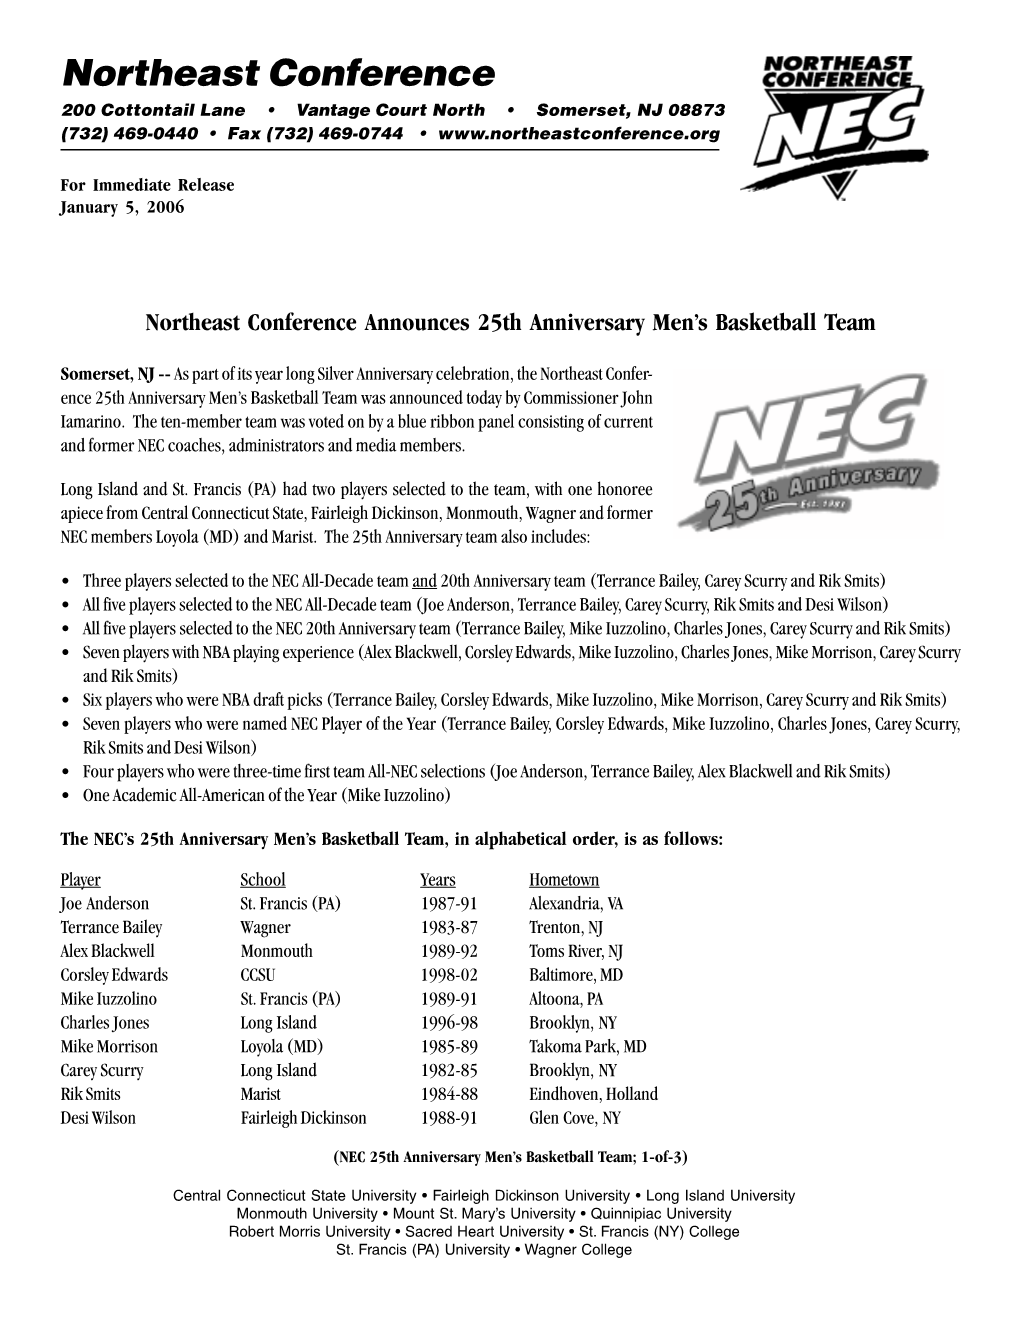 Northeast Conference Announces 25Th Anniversary Men's Basketball